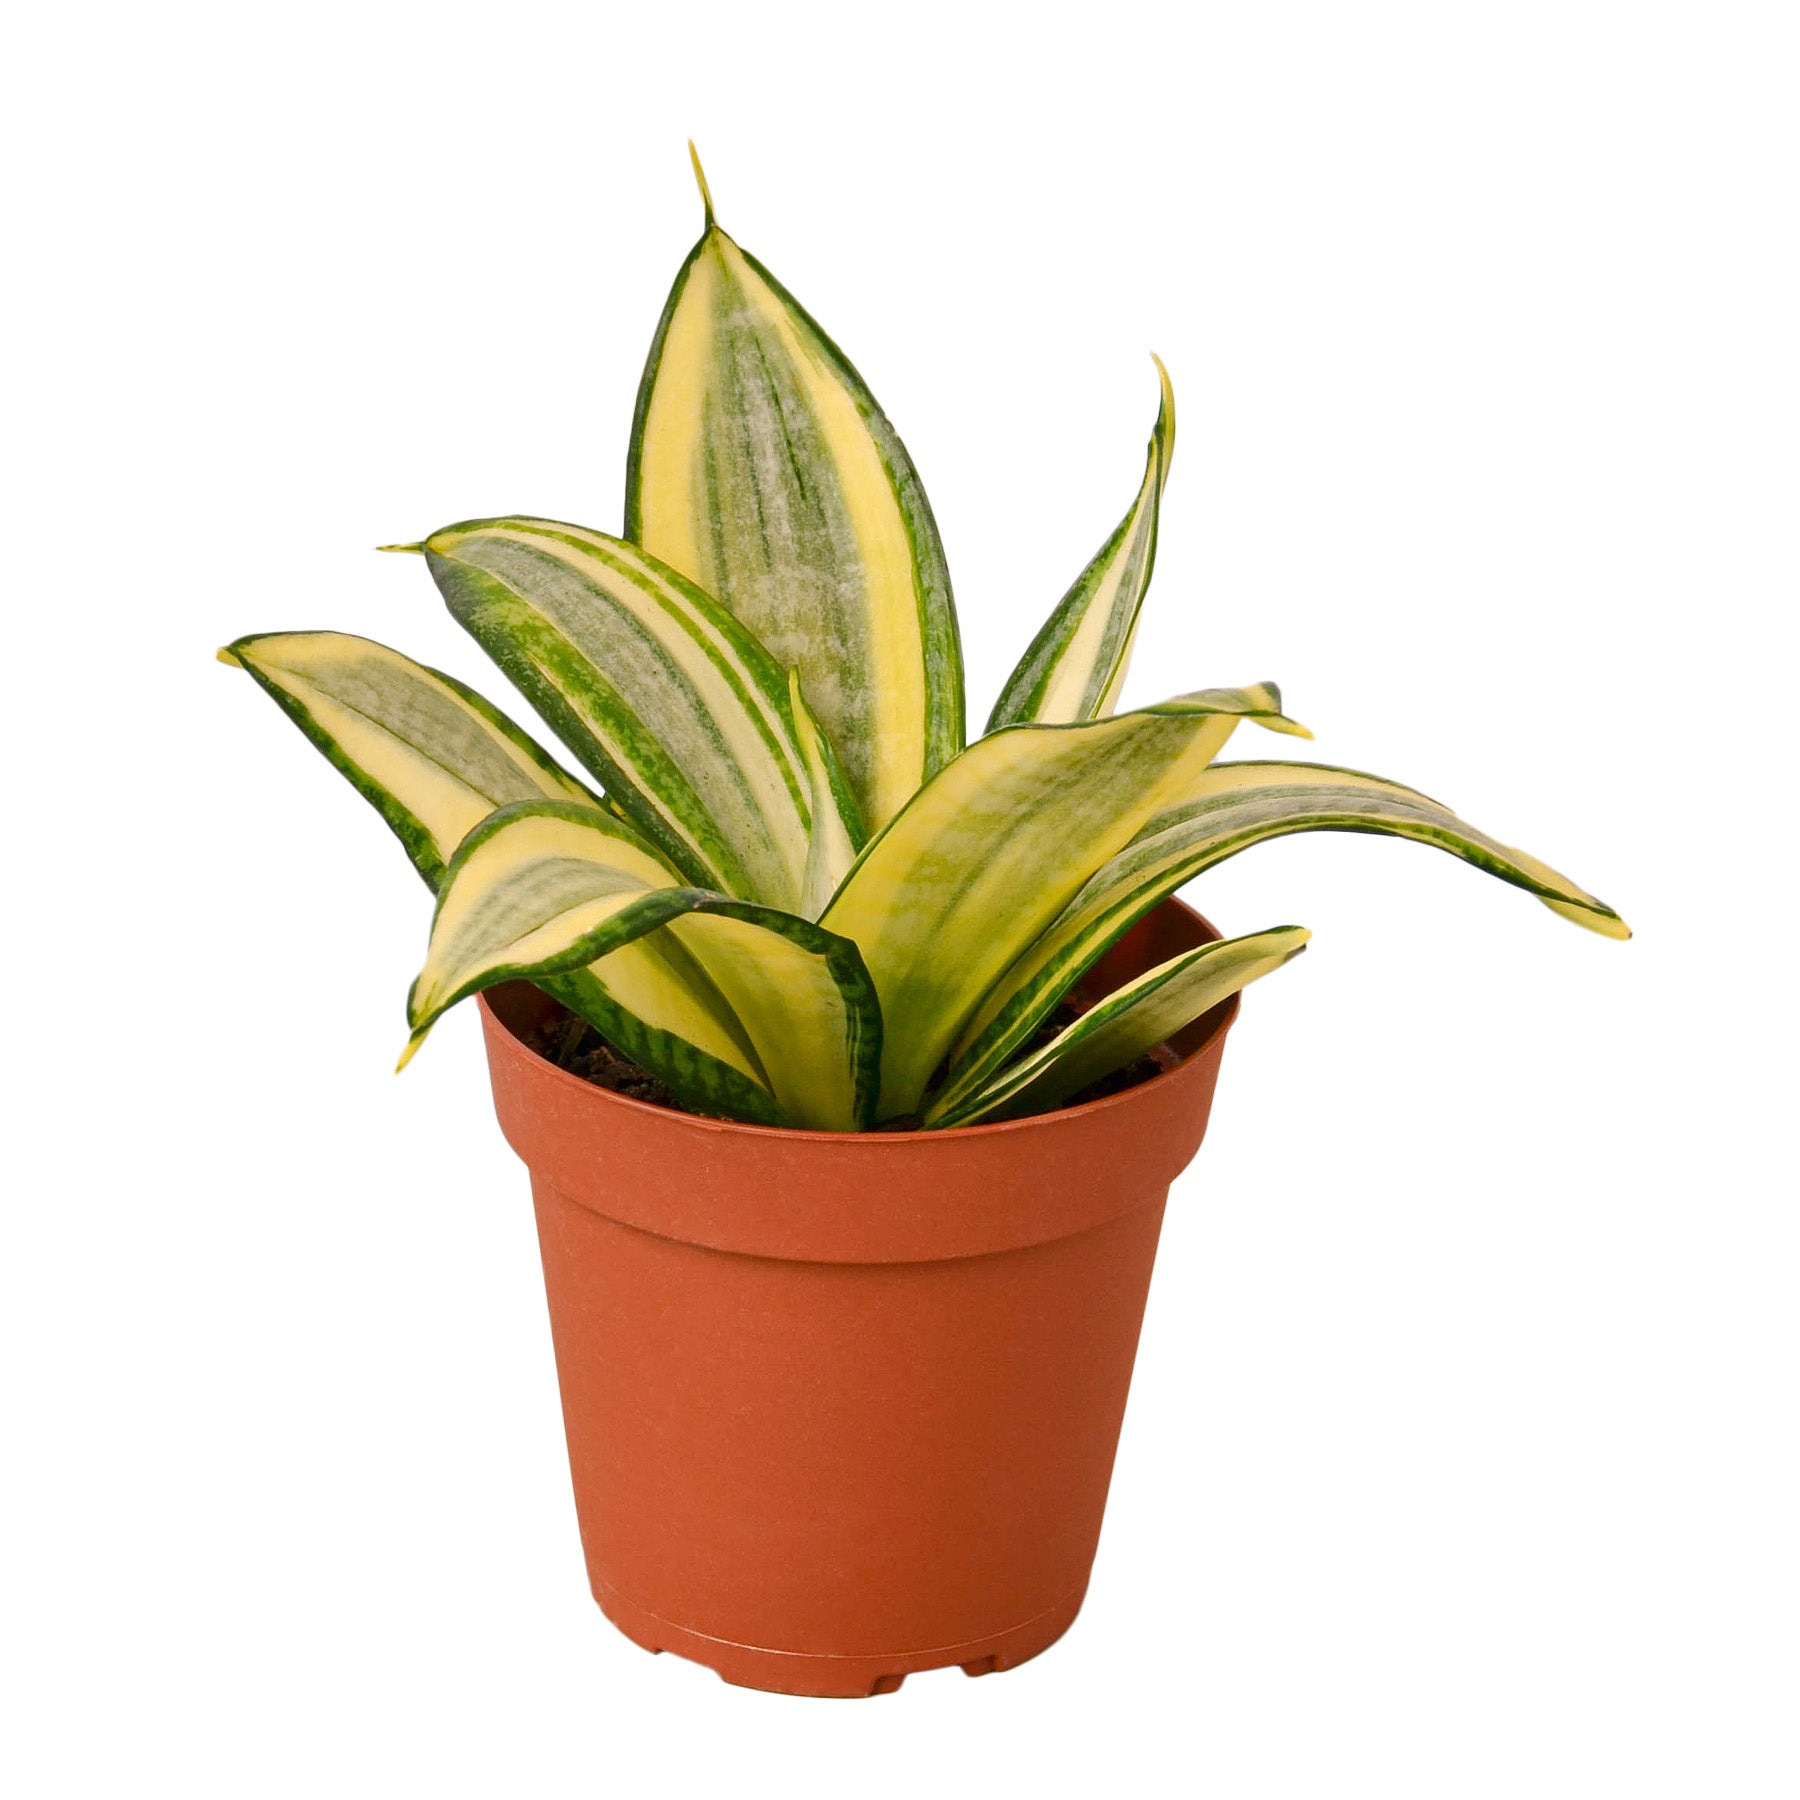 A potted snake plant on a white background available at a garden center near me.